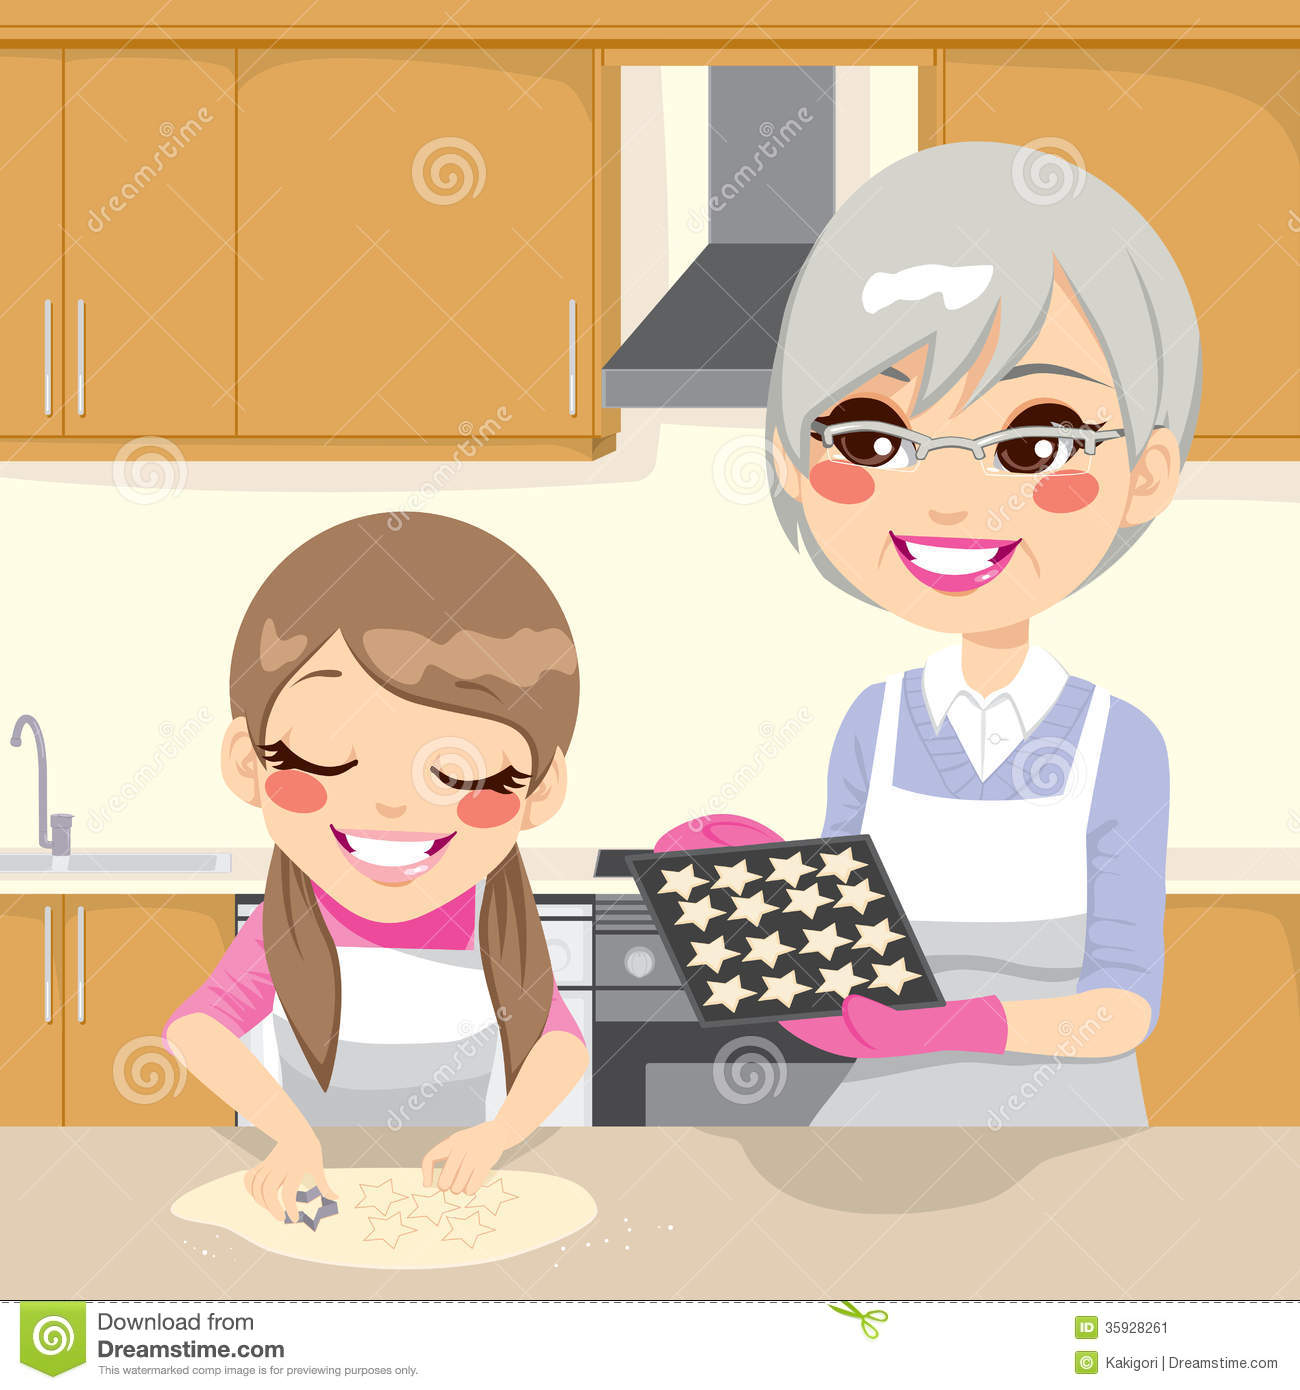 Making Cookies Together Stock Image   Image  35928261